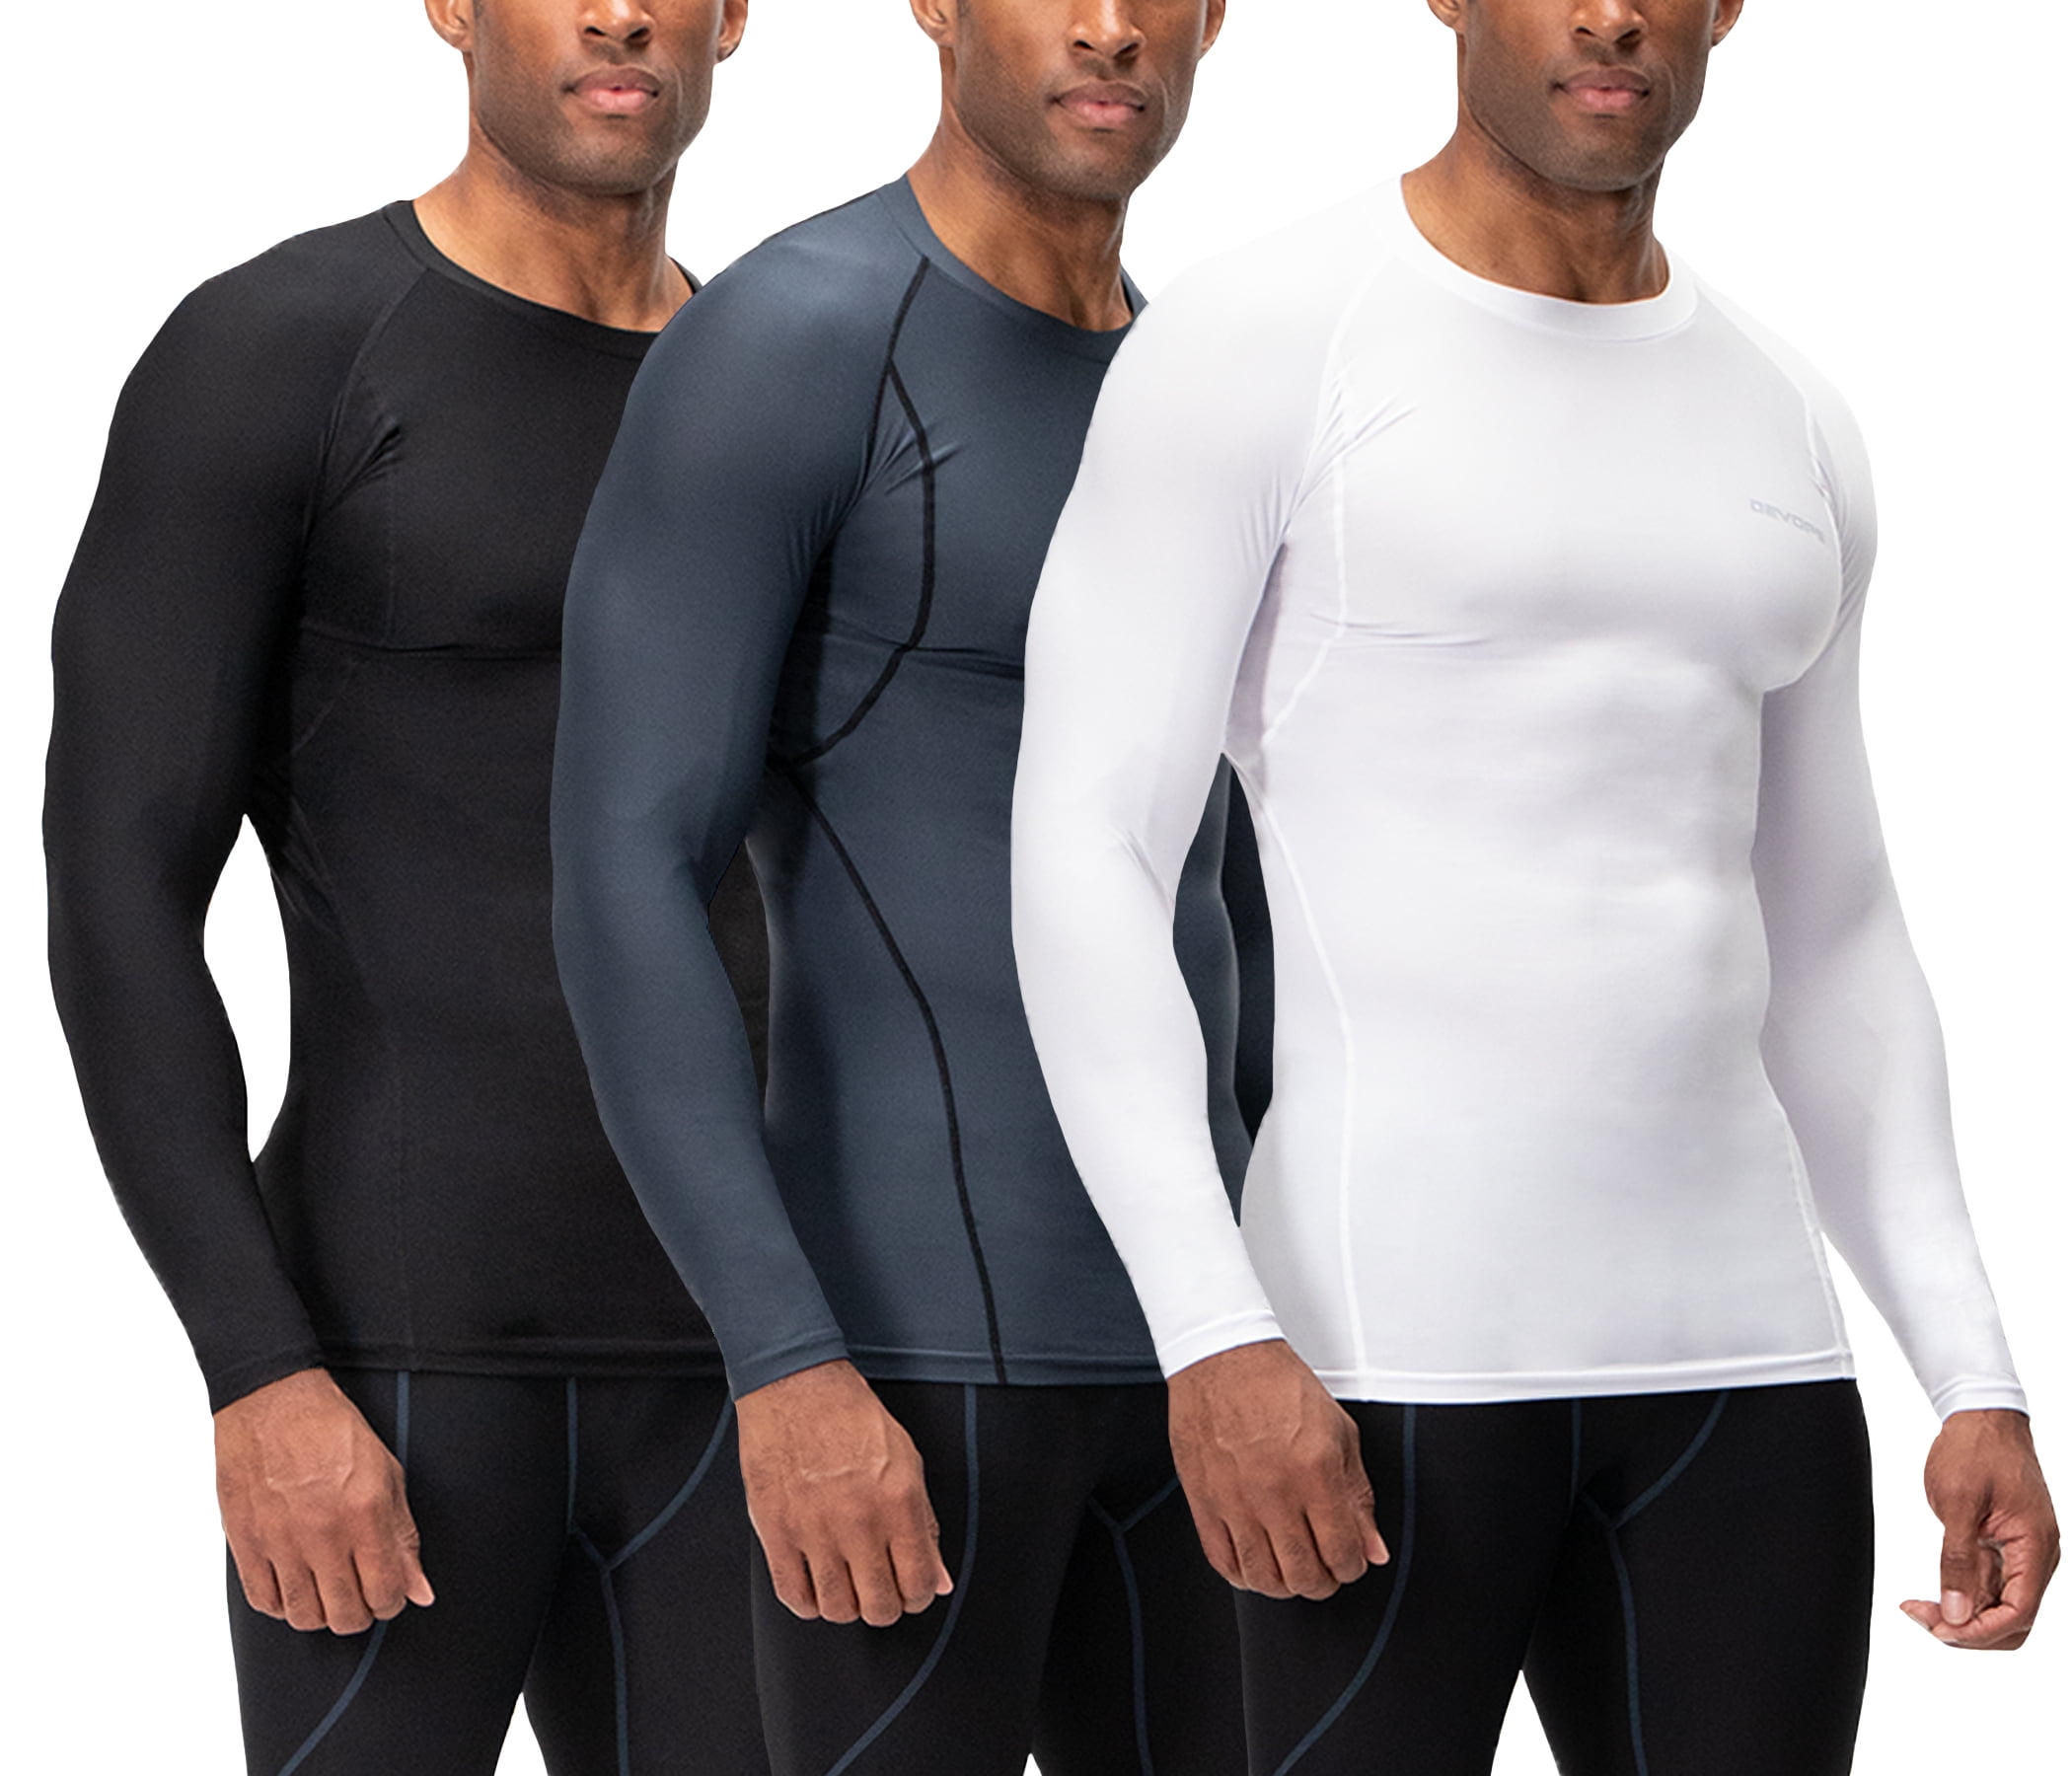  DEVOPS 3 Pack Men's Athletic Compression Shirts Sleeveless  (Small, White/White/White) : Clothing, Shoes & Jewelry